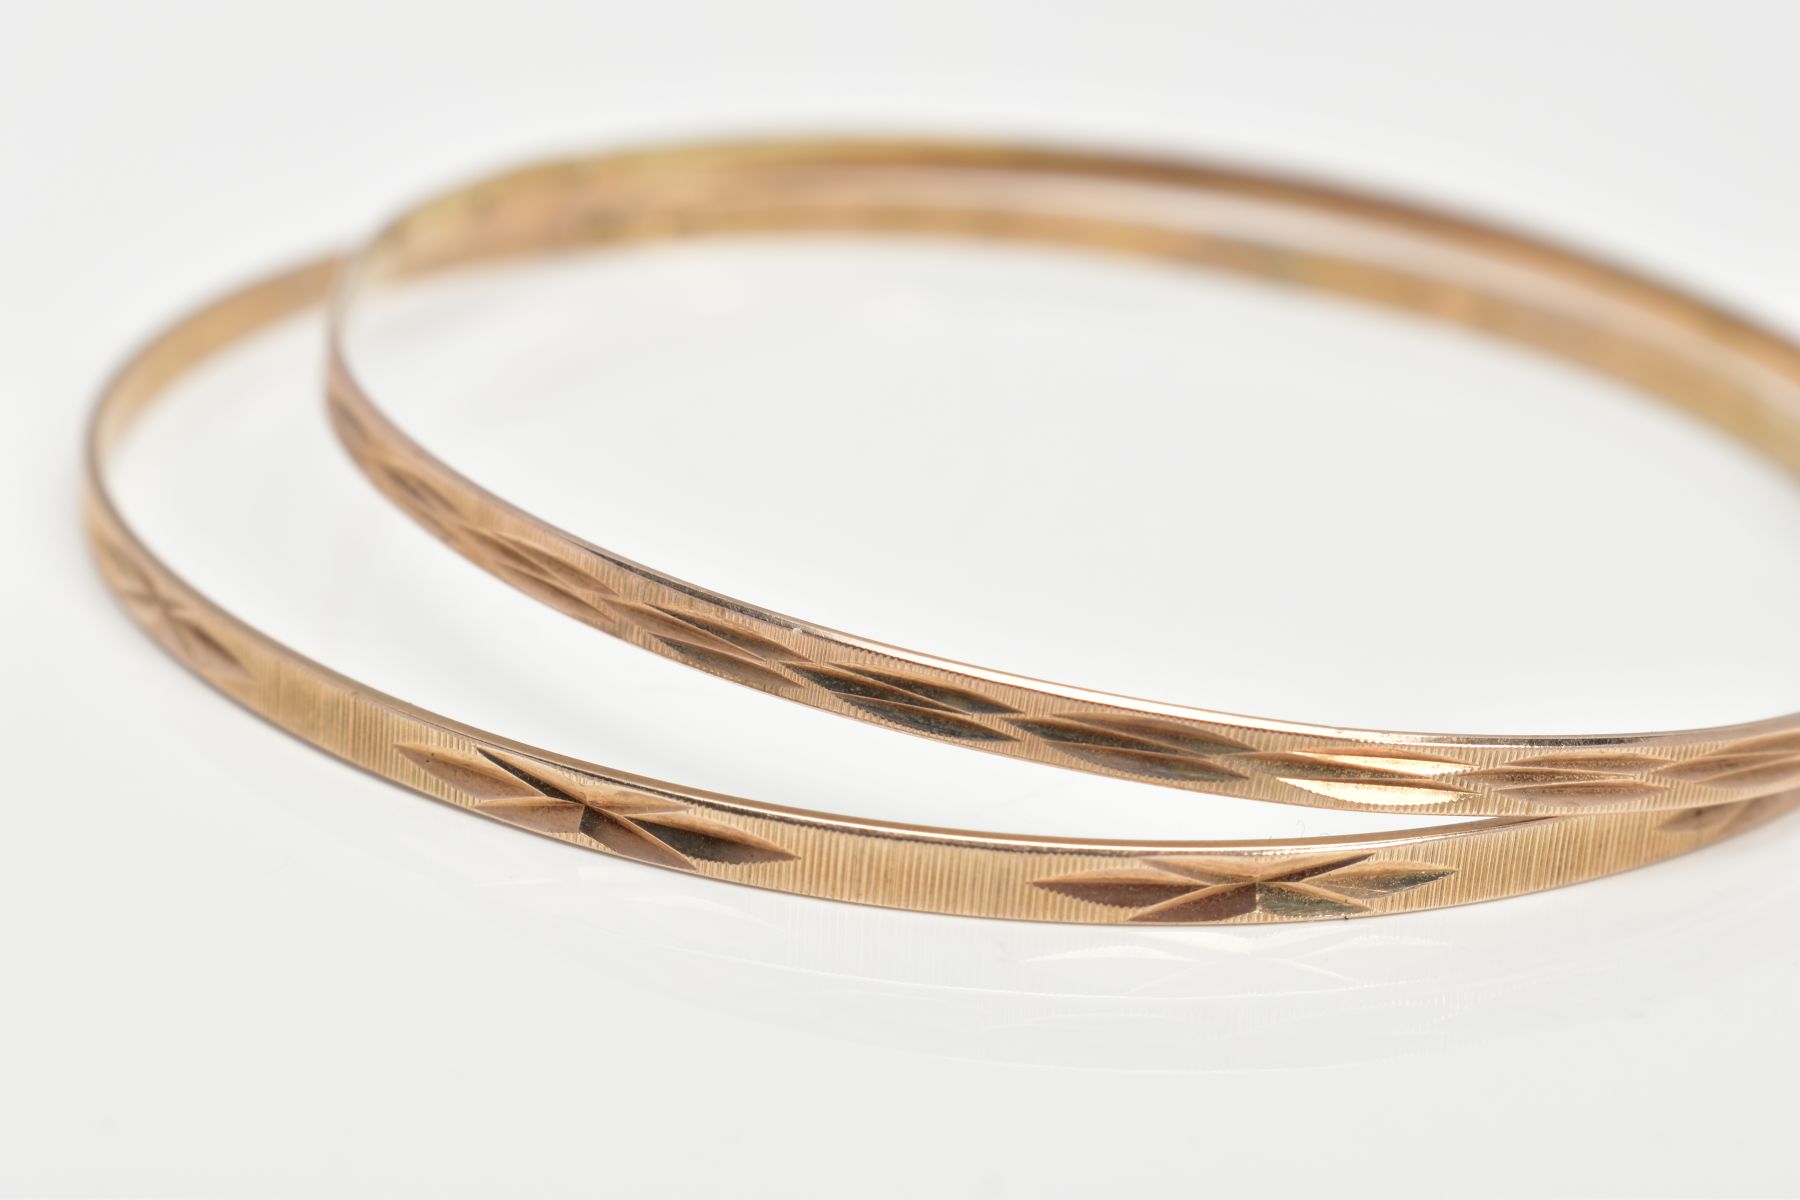 TWO 9CT GOLD THIN STACKING BANGLES, textured pattern, each hallmarked 9ct gold London import, - Image 2 of 2